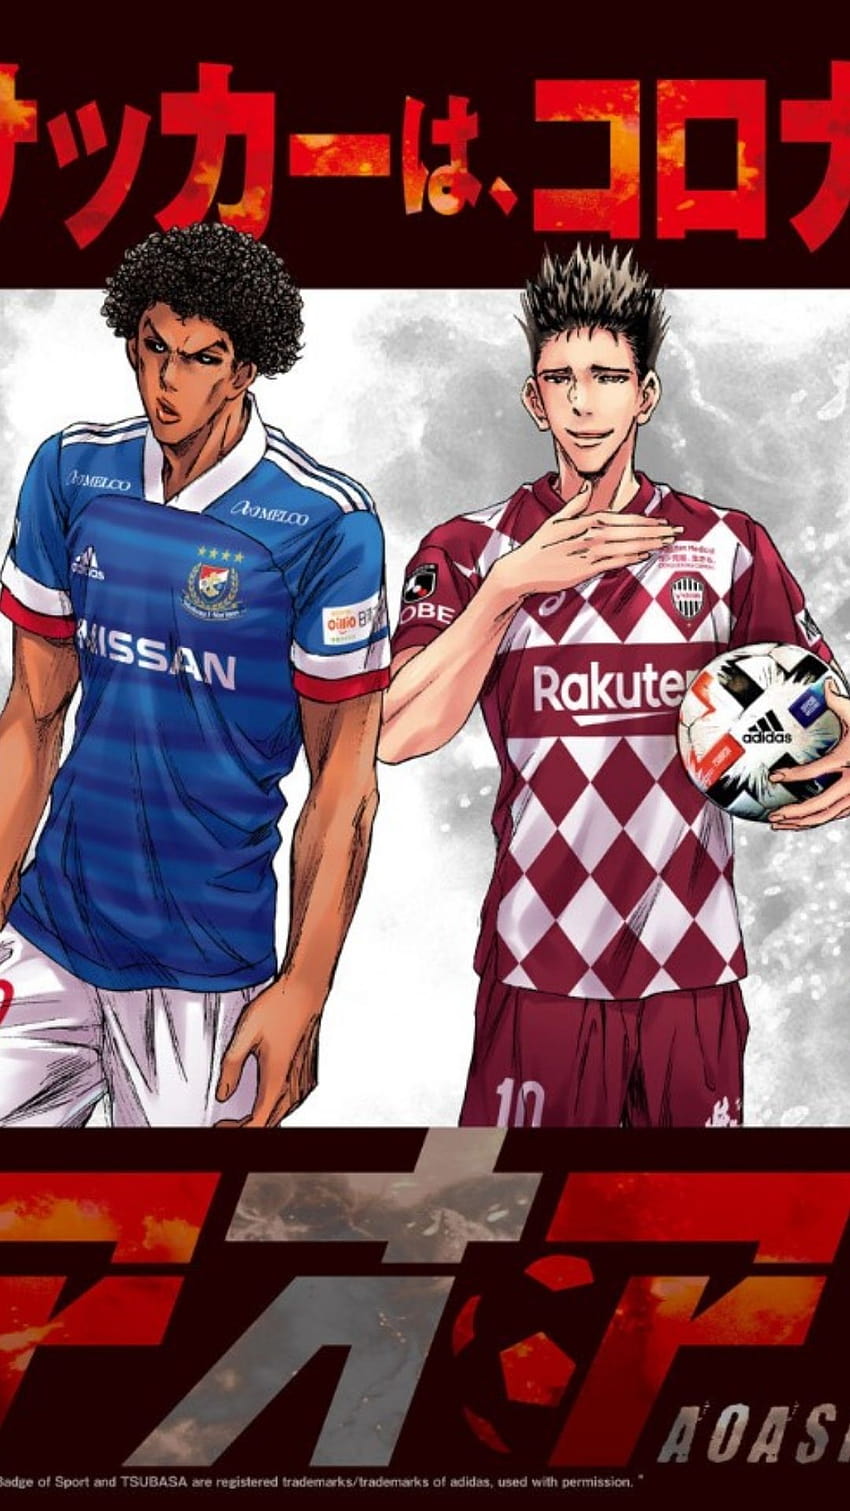 AoashiYear 2022 is for soccer anime Sold over 8 million copies Aoashi  is finally made into anime in Spring 2022